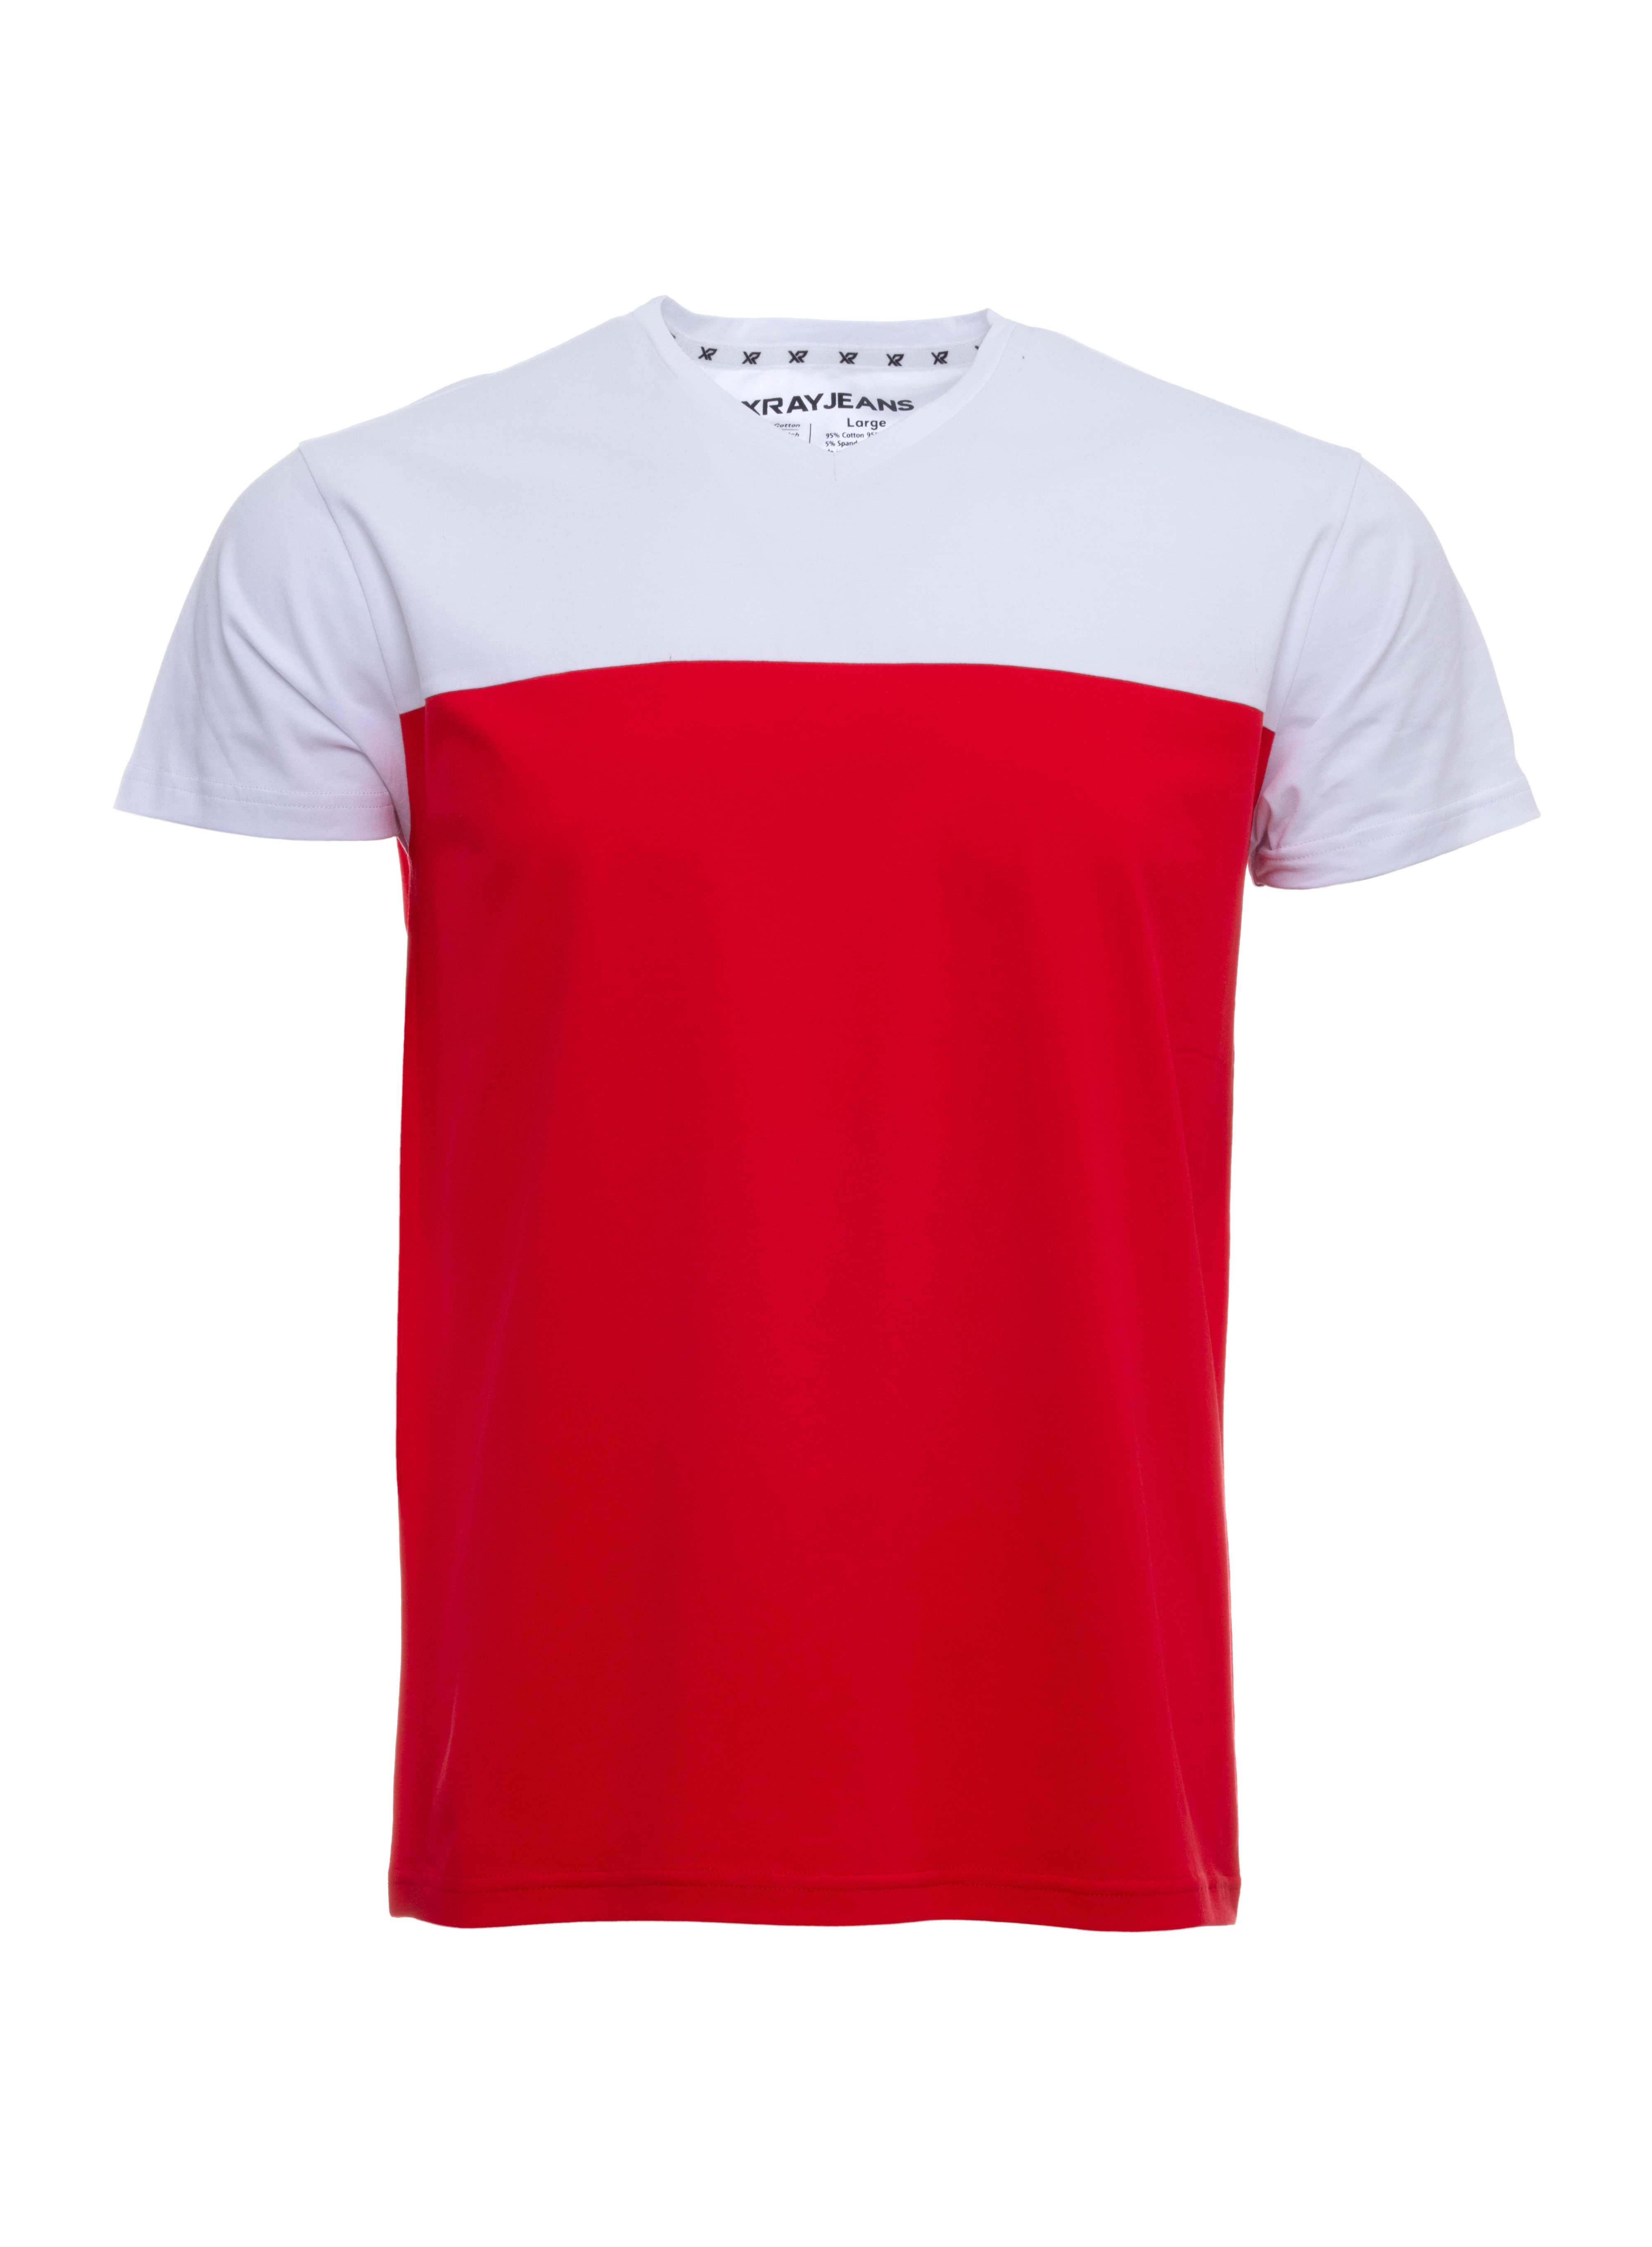 X RAY Men's Soft Stretch Cotton Solid Colorblock Short Sleeve V-Neck Slim Fit T-Shirt, Fashion Sport Casual Tee for Men, Red/White Size XXX-Large - image 1 of 4